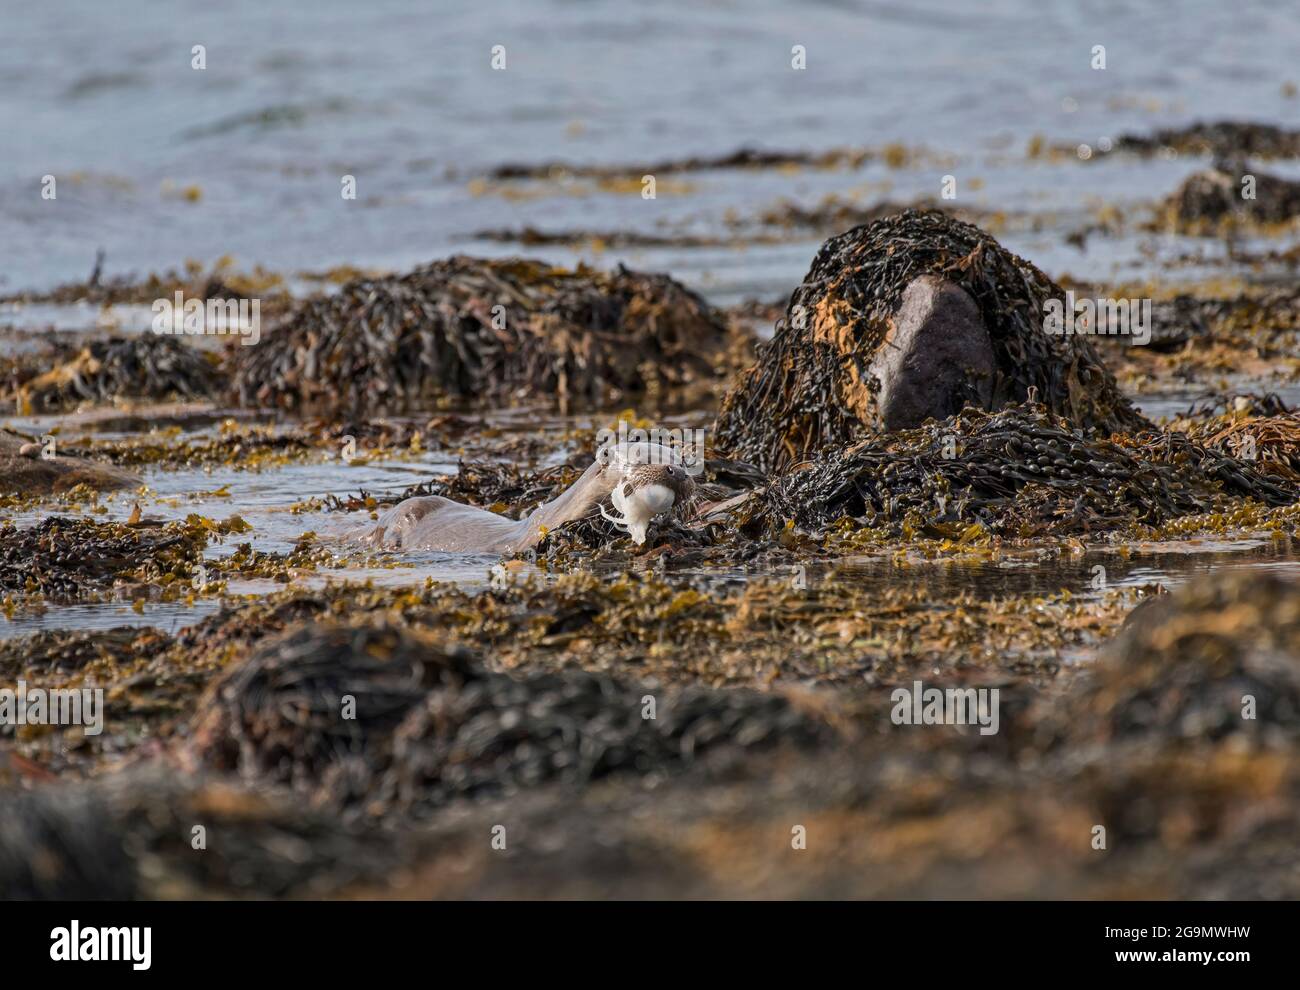 Eurasian Otter, Lutra lutra, with octopus, at the side of a Scottish Loch. Isle of Mull, Scotland, UK Stock Photo